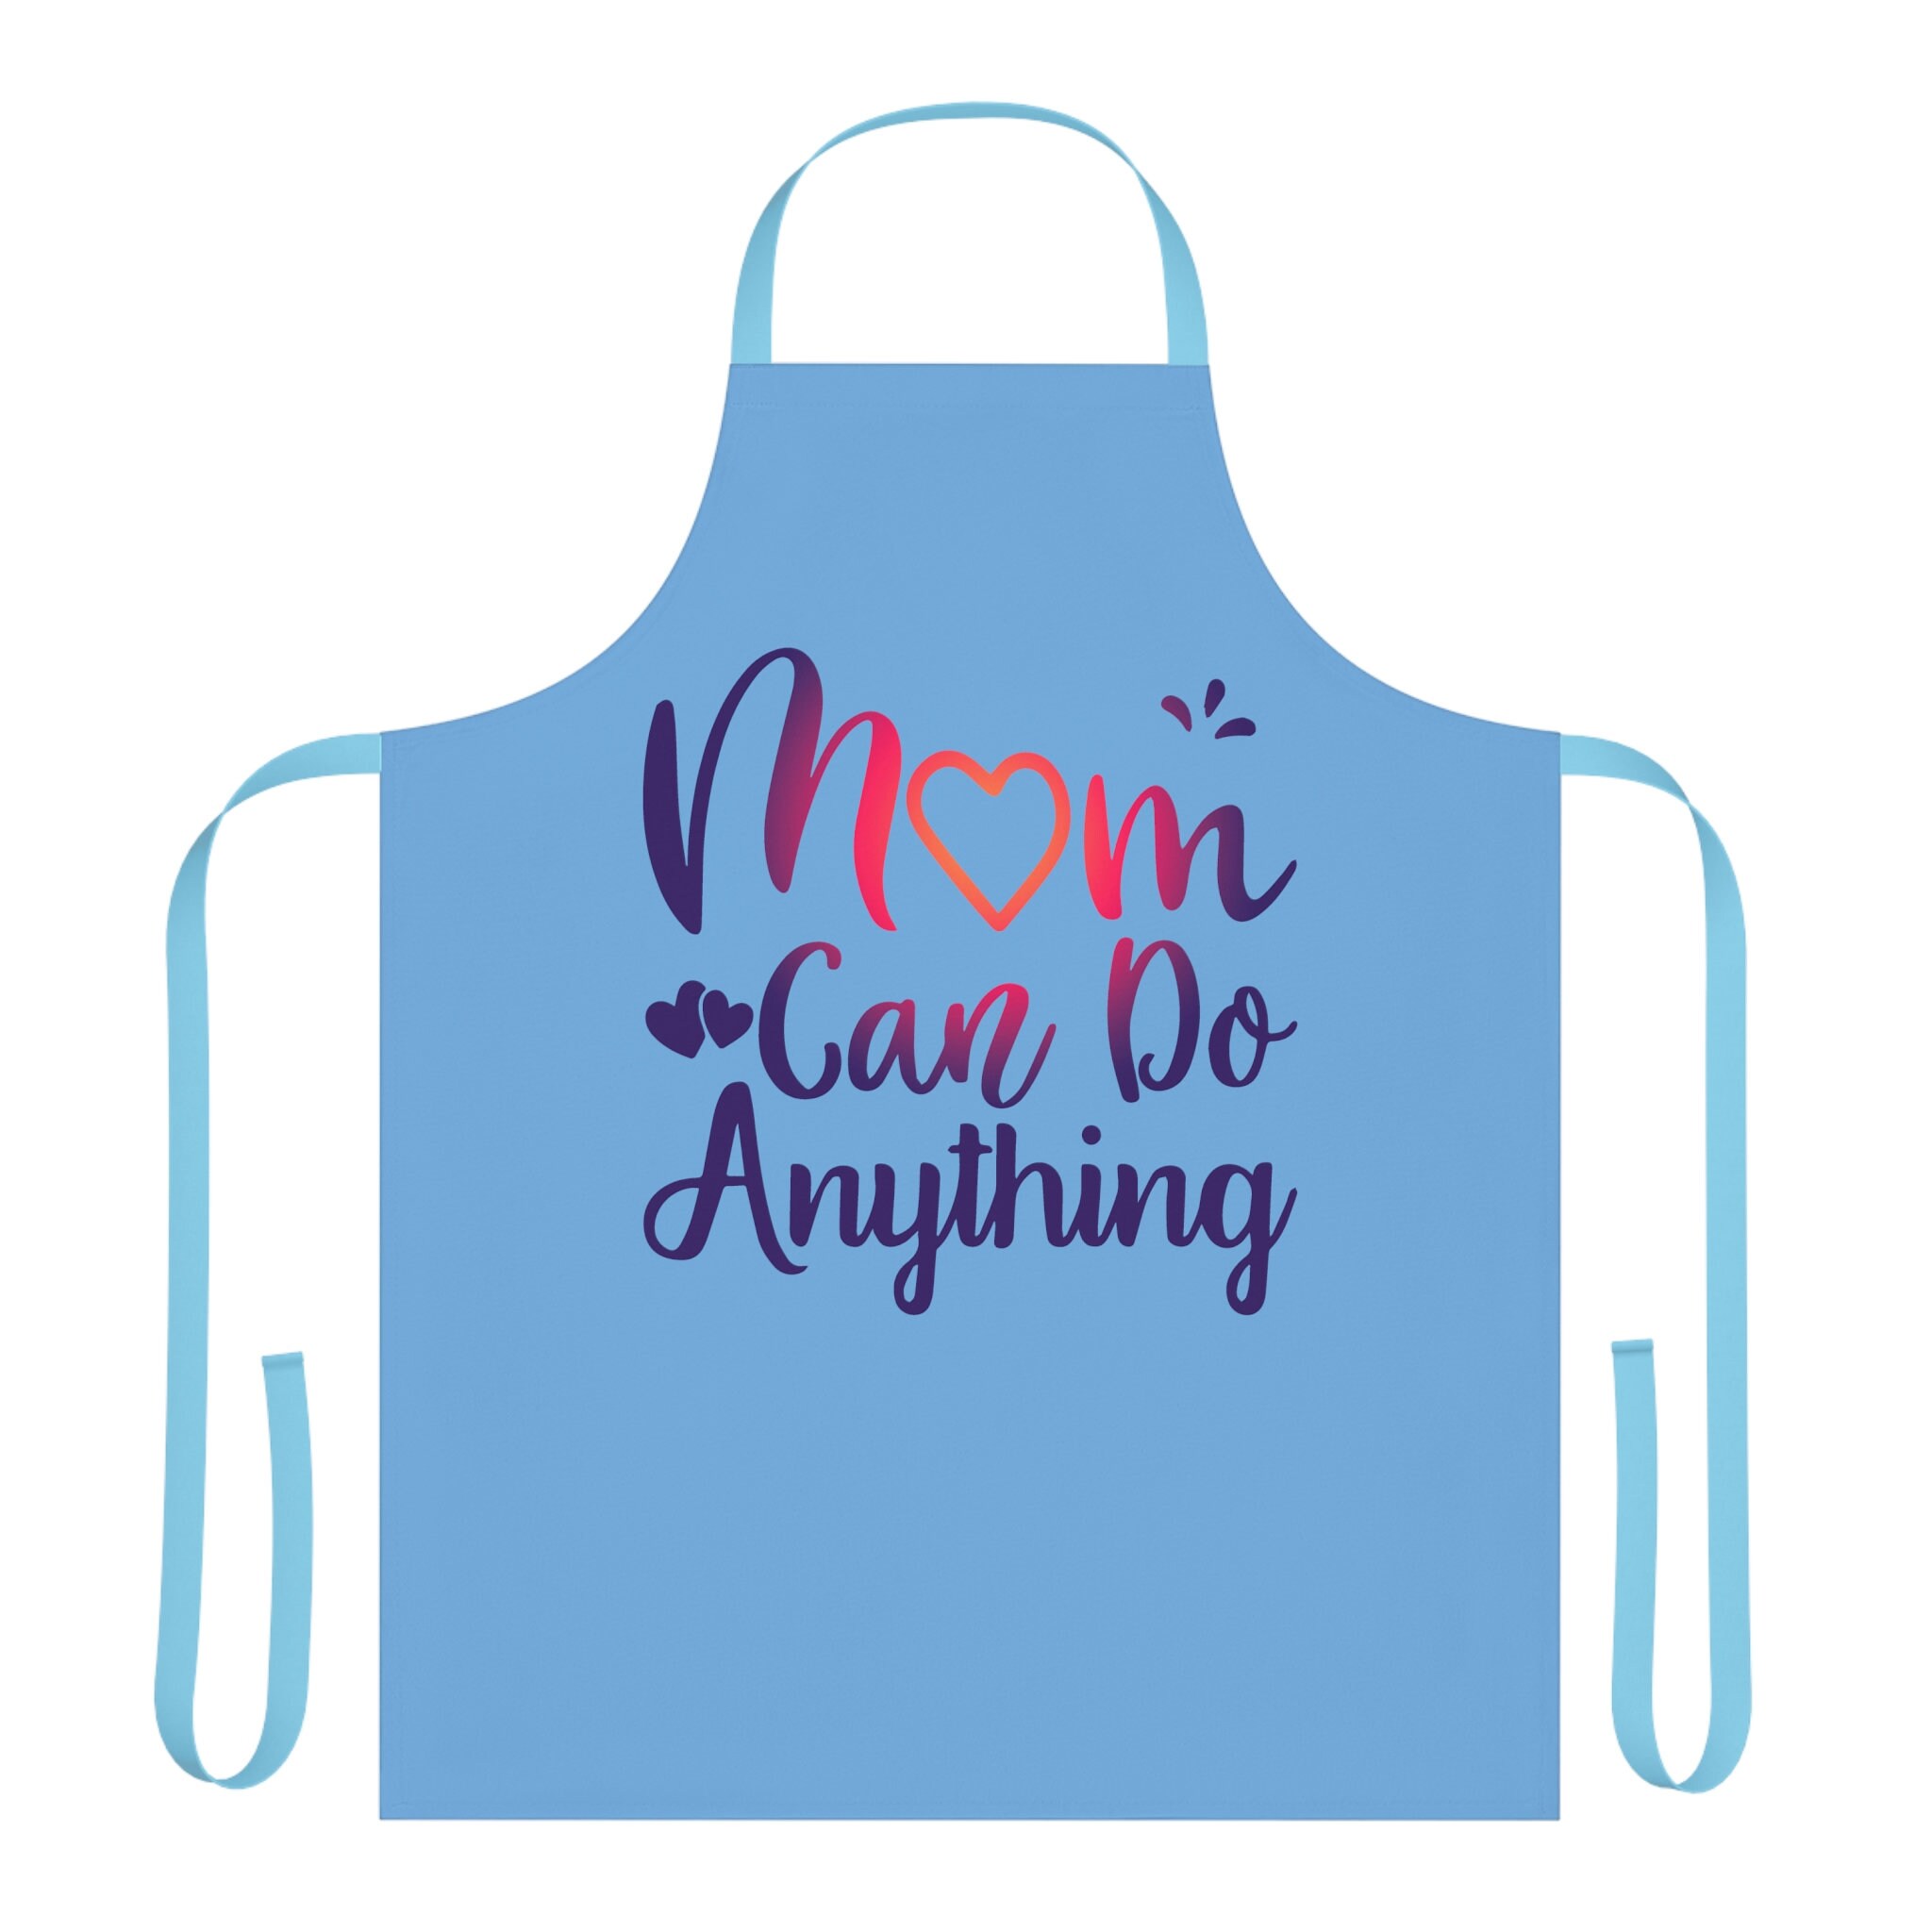 Apron With Print „Best Mom“ – Essential Cooking Tool For Every Chef